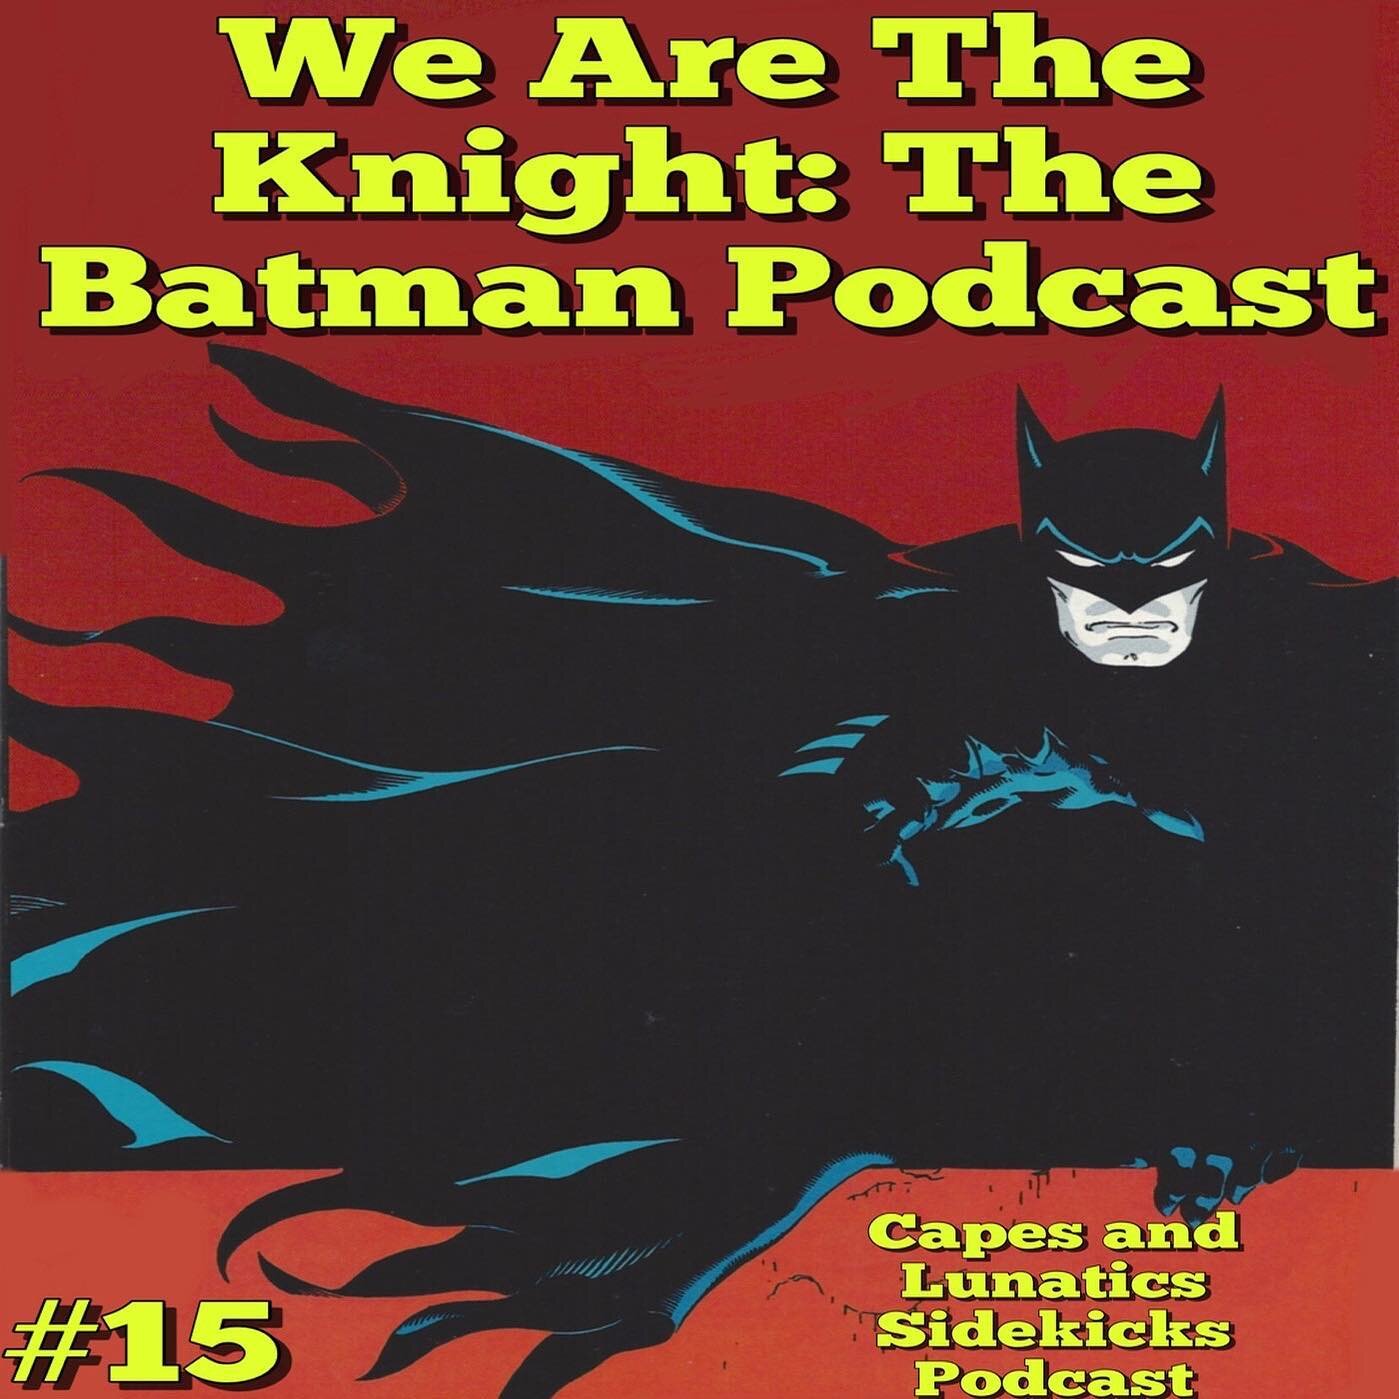 We Are The Knight: The #batman #podcast episode #15! @nightwingpdp and @lilithhellfire86 review #detectivecomics #625 &amp; #628! Check it out on #youtube or anywhere you download podcasts (Link in bio). #itunes #libsyn #stitcher #dccomics  #abattoir